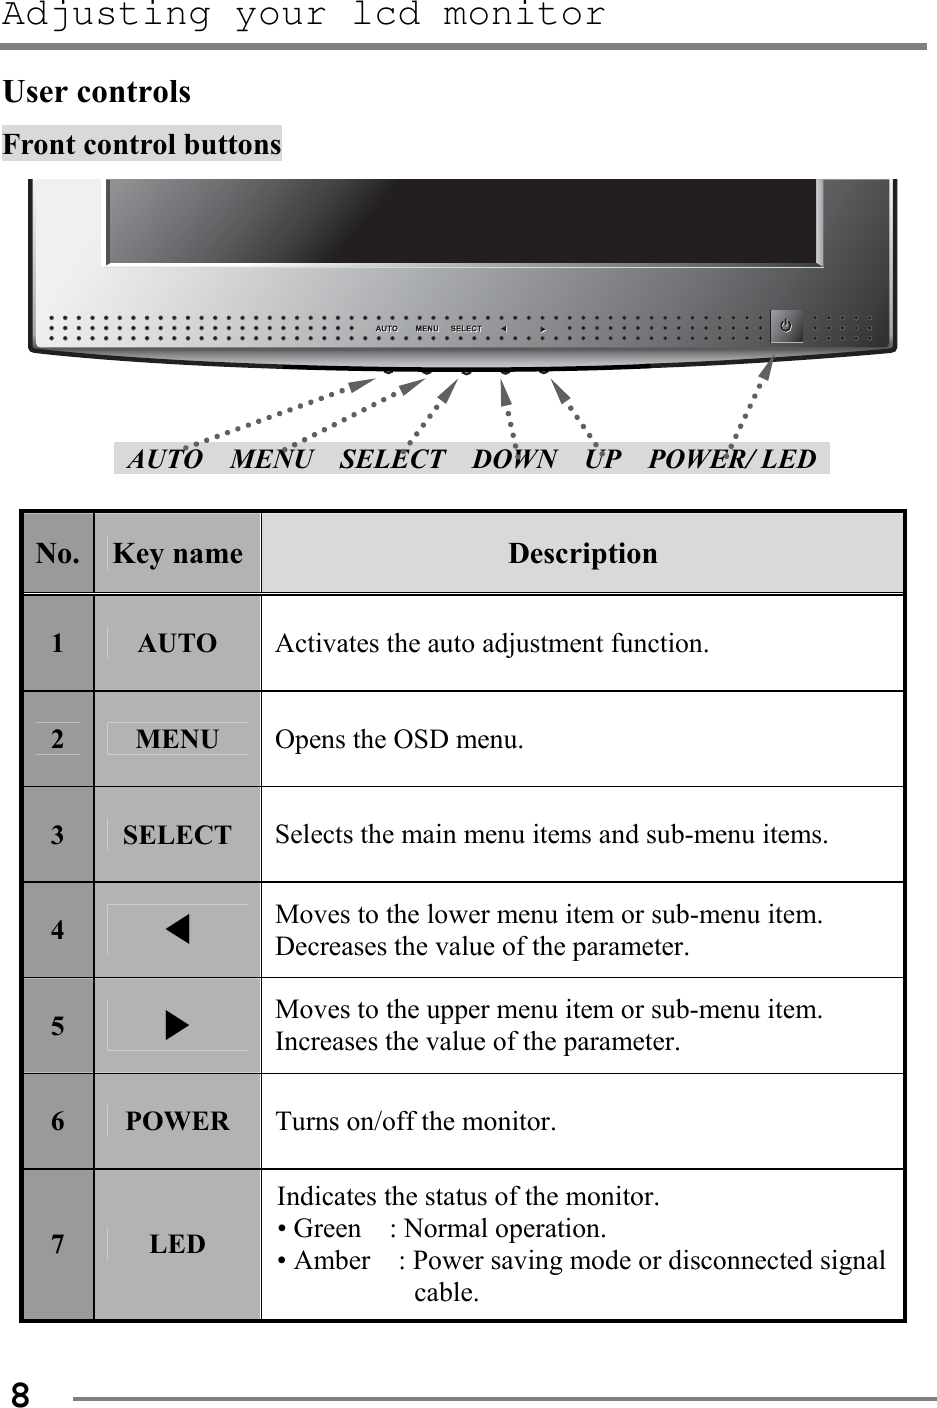 Adjusting your lcd monitor   8 User controls Front control buttons           AUTO  MENU  SELECT  DOWN  UP  POWER/ LED   No.  Key name  Description 1  AUTO  Activates the auto adjustment function. 2  MENU  Opens the OSD menu. 3  SELECT  Selects the main menu items and sub-menu items. 4  ◀ Moves to the lower menu item or sub-menu item. Decreases the value of the parameter. 5  ▶ Moves to the upper menu item or sub-menu item. Increases the value of the parameter. 6  POWER  Turns on/off the monitor. 7  LED Indicates the status of the monitor. • Green    : Normal operation. • Amber    : Power saving mode or disconnected signal cable.  